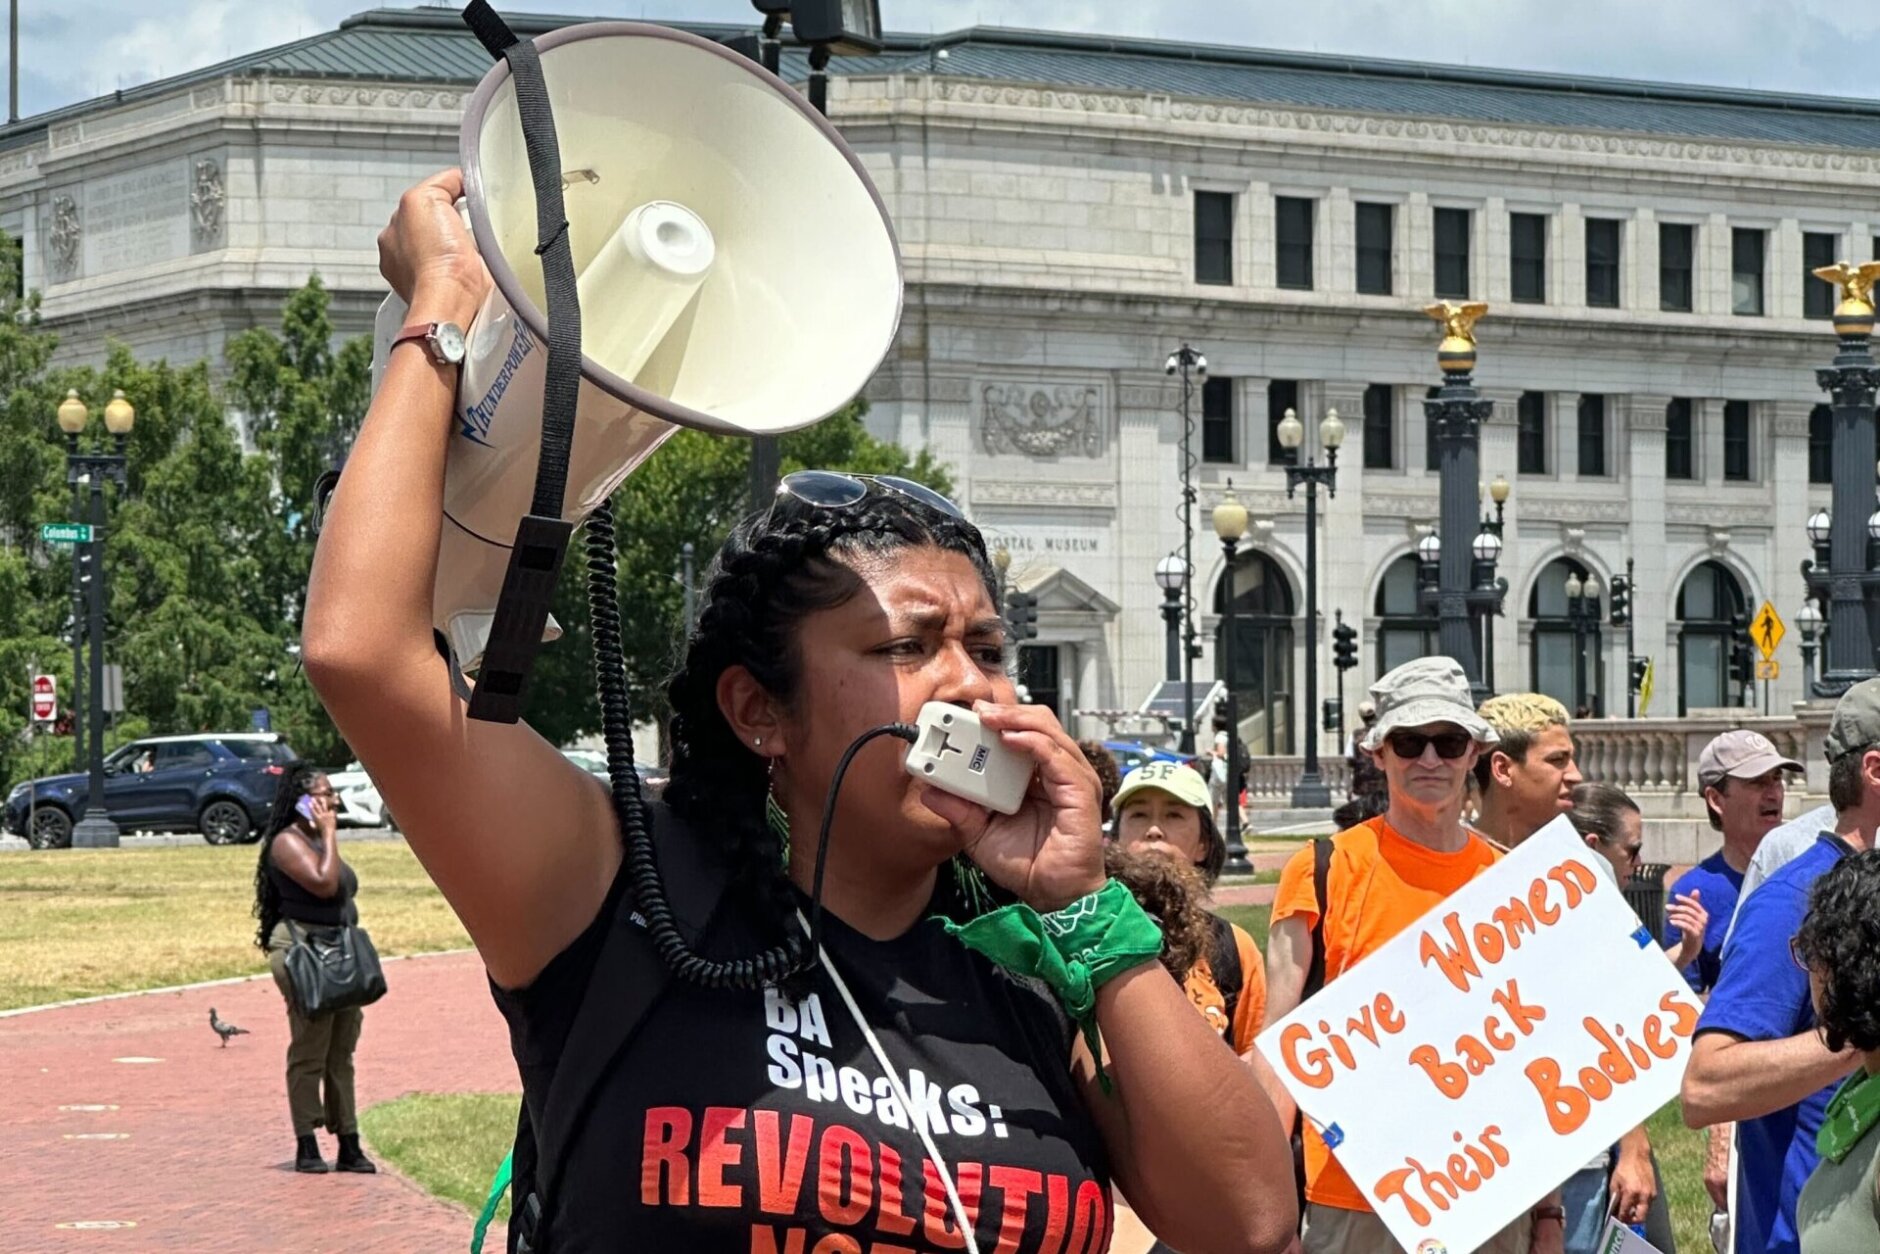 <p>“We won’t go back!” cried abortion rights supporters of all ages, races and genders in attendance at Saturday&#8217;s event.</p>
<p>For many abortion rights advocates who flocked to D.C. Saturday, the fight for reproductive healthcare access is one that they say affects everyone.</p>
